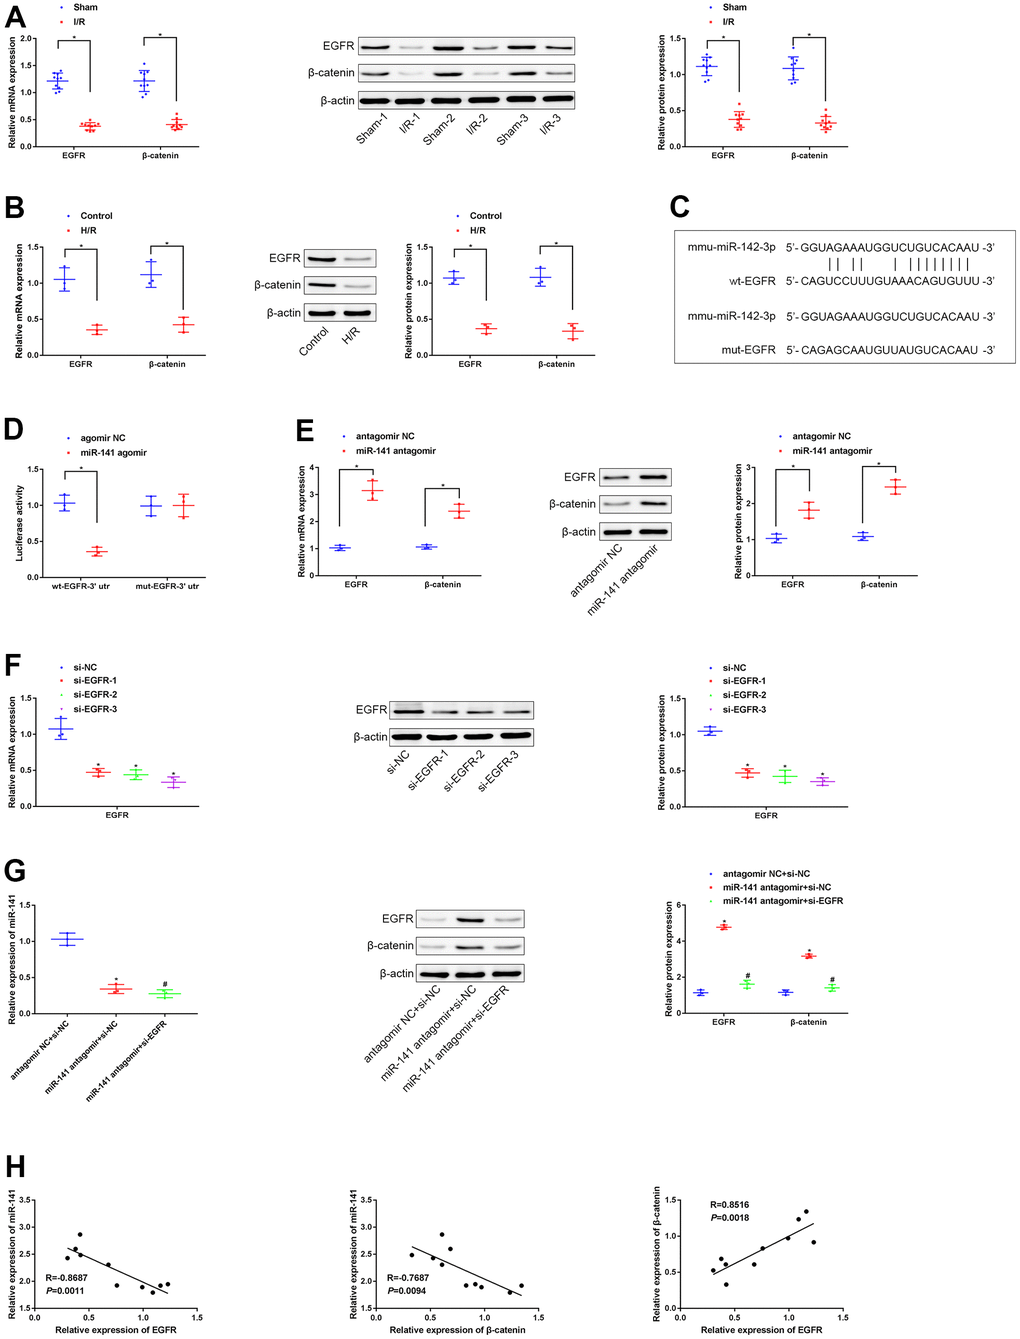 miR-141 represses EGFR to suppress expression of β-catenin. (A, B) RT-qPCR and Western blot assays were used to detect the expression of EGFR and β-catenin in lung tissues of mice and PMVECs with I/R injury. (C) the predicted binding sites between miR-141 and EGFR based on TargetScan database. (D) the dual luciferase reporter gene assay proved that validation of the binding relationship between miR-141 and EGFR. (E) RT-qPCR and Western blot assays were used to detect the expression of EGFR and β-catenin in response to silencing miR-141 in H/R cell model. (F) RT-qPCR assay was used to detect the silencing efficiency of si-EGFR-1/-2/-3 in H/R-exposed mouse PMVECs. (G) The expression of miR-141, EGFR and β-catenin in PMVECs by RT-qPCR and Western blot analysis. (H) Pearson correlation analysis of the correlation between miR-141 and EGFR, between miR-141 and β-catenin, as well as between EGFR and β-catenin. * p 